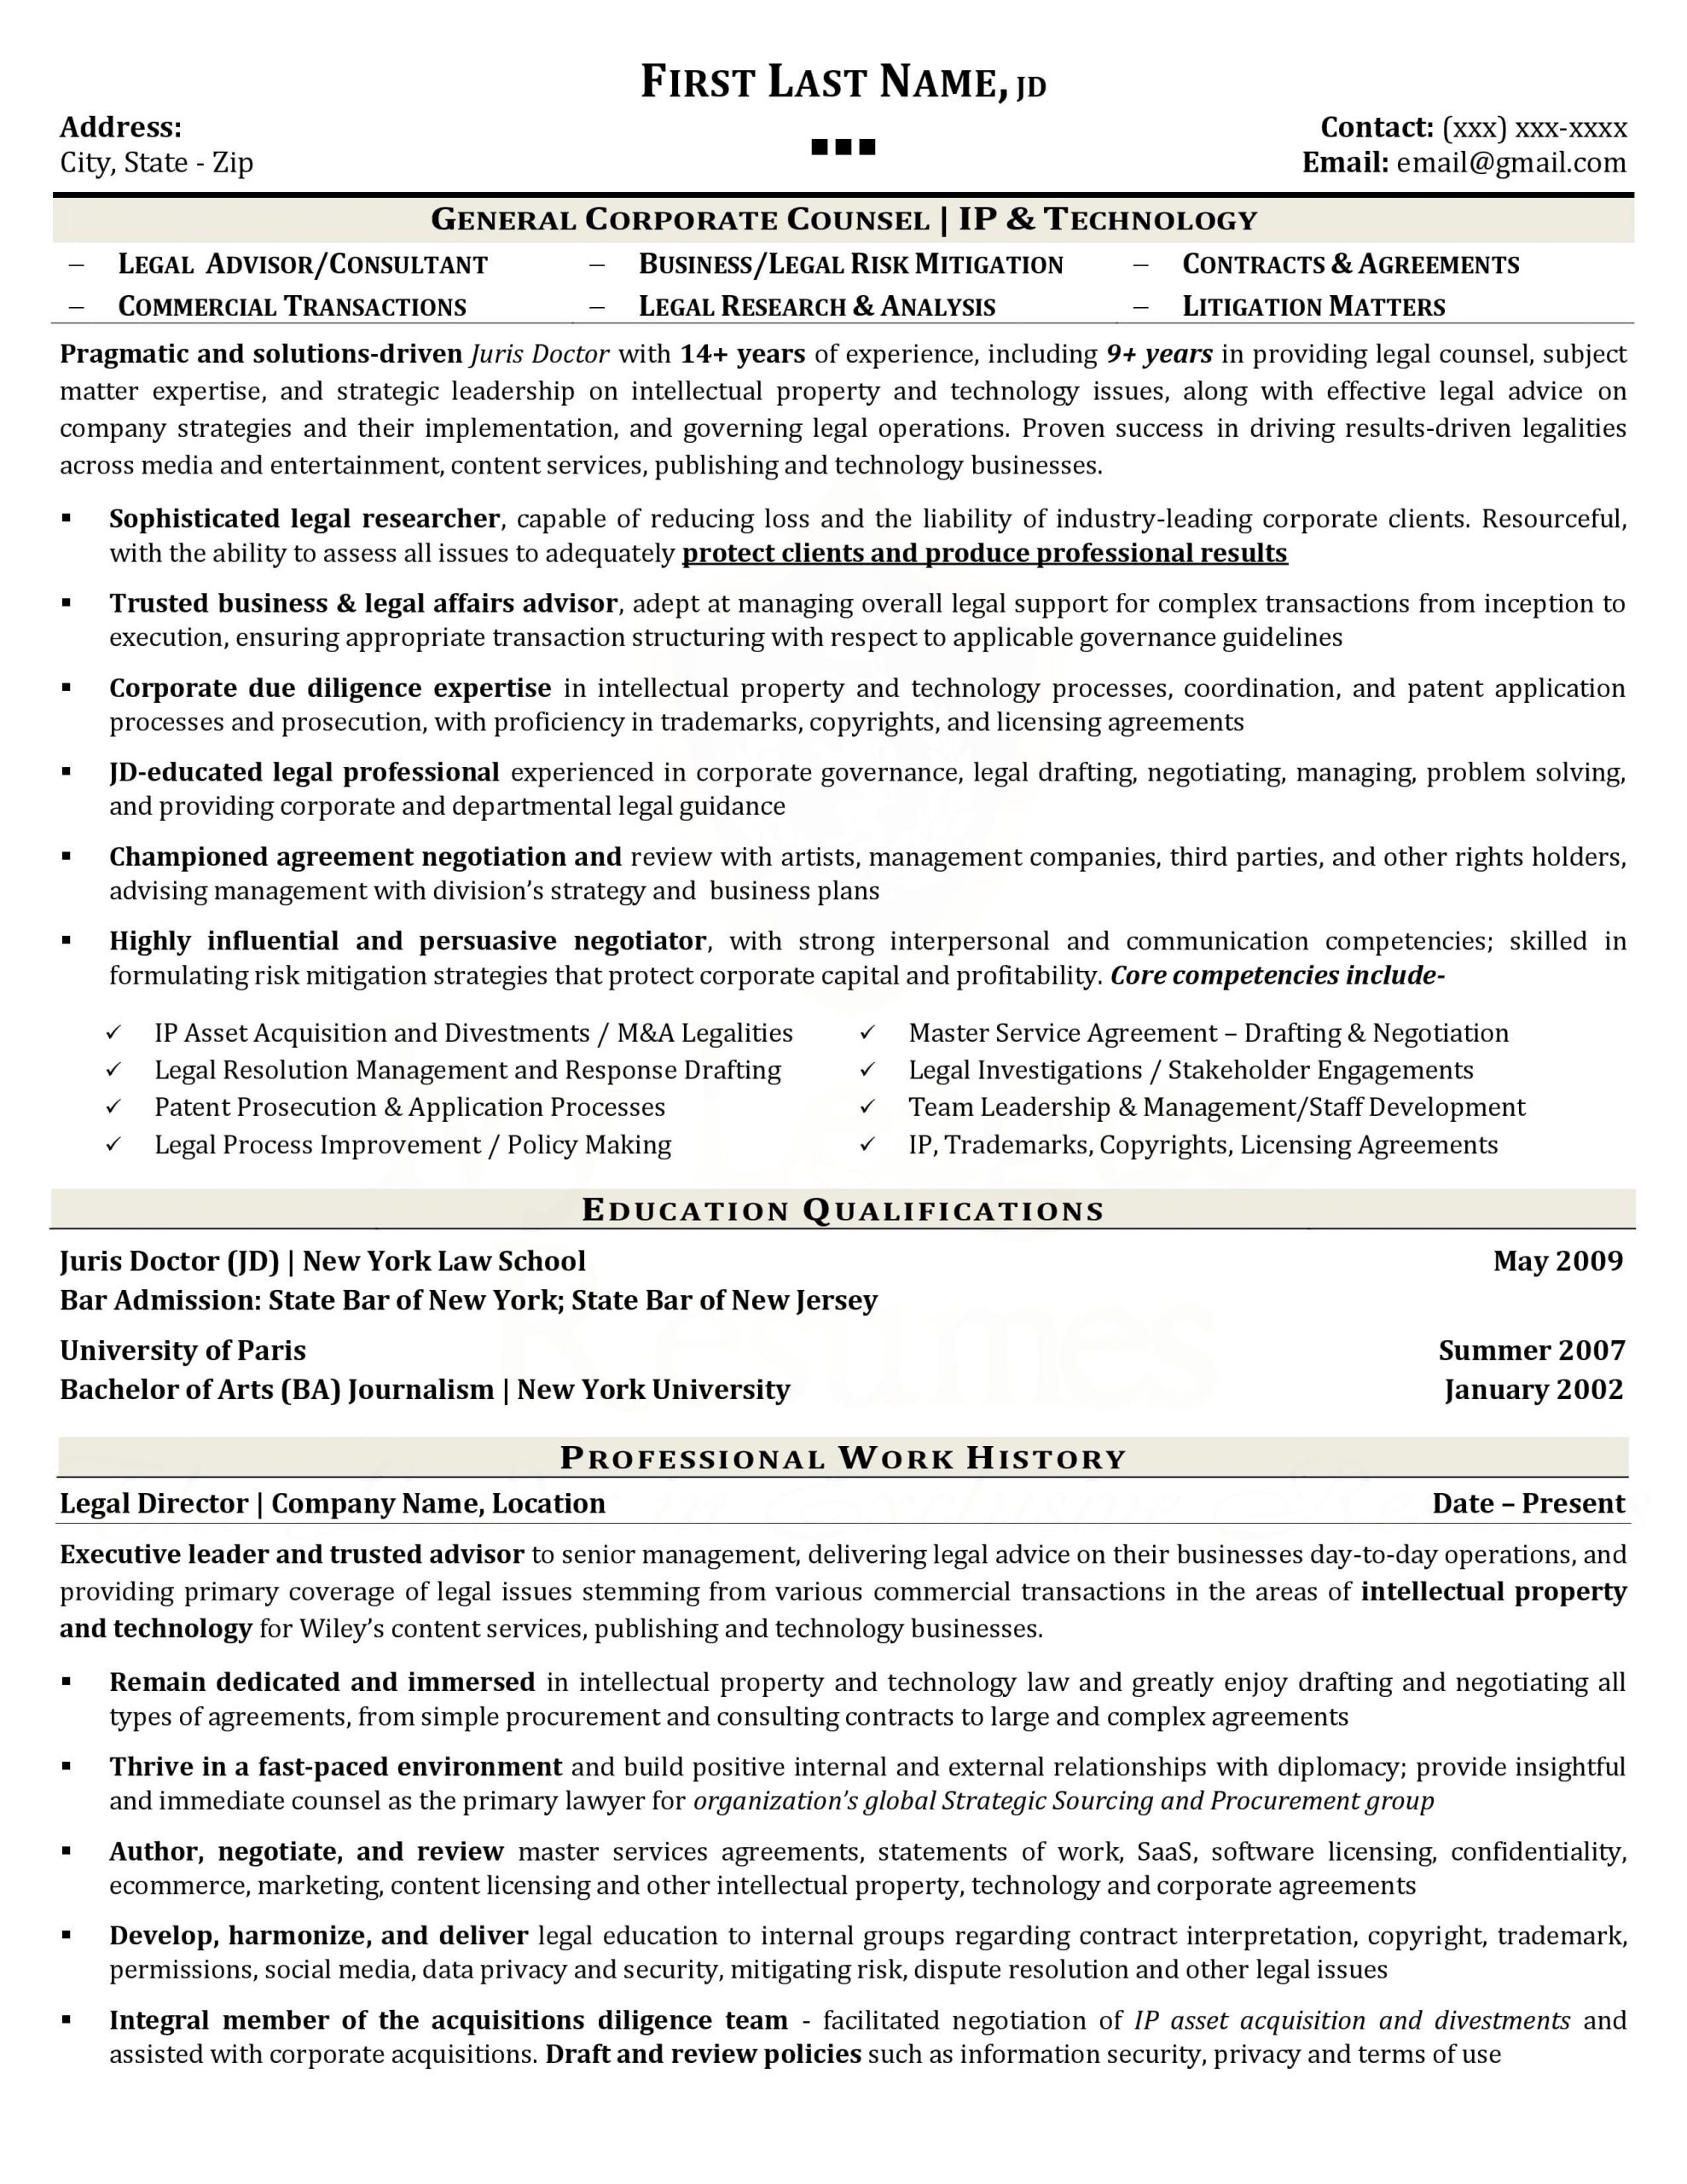 Sample High School Resume for Ivy League Sample College Application Resume Ivy League – Resume